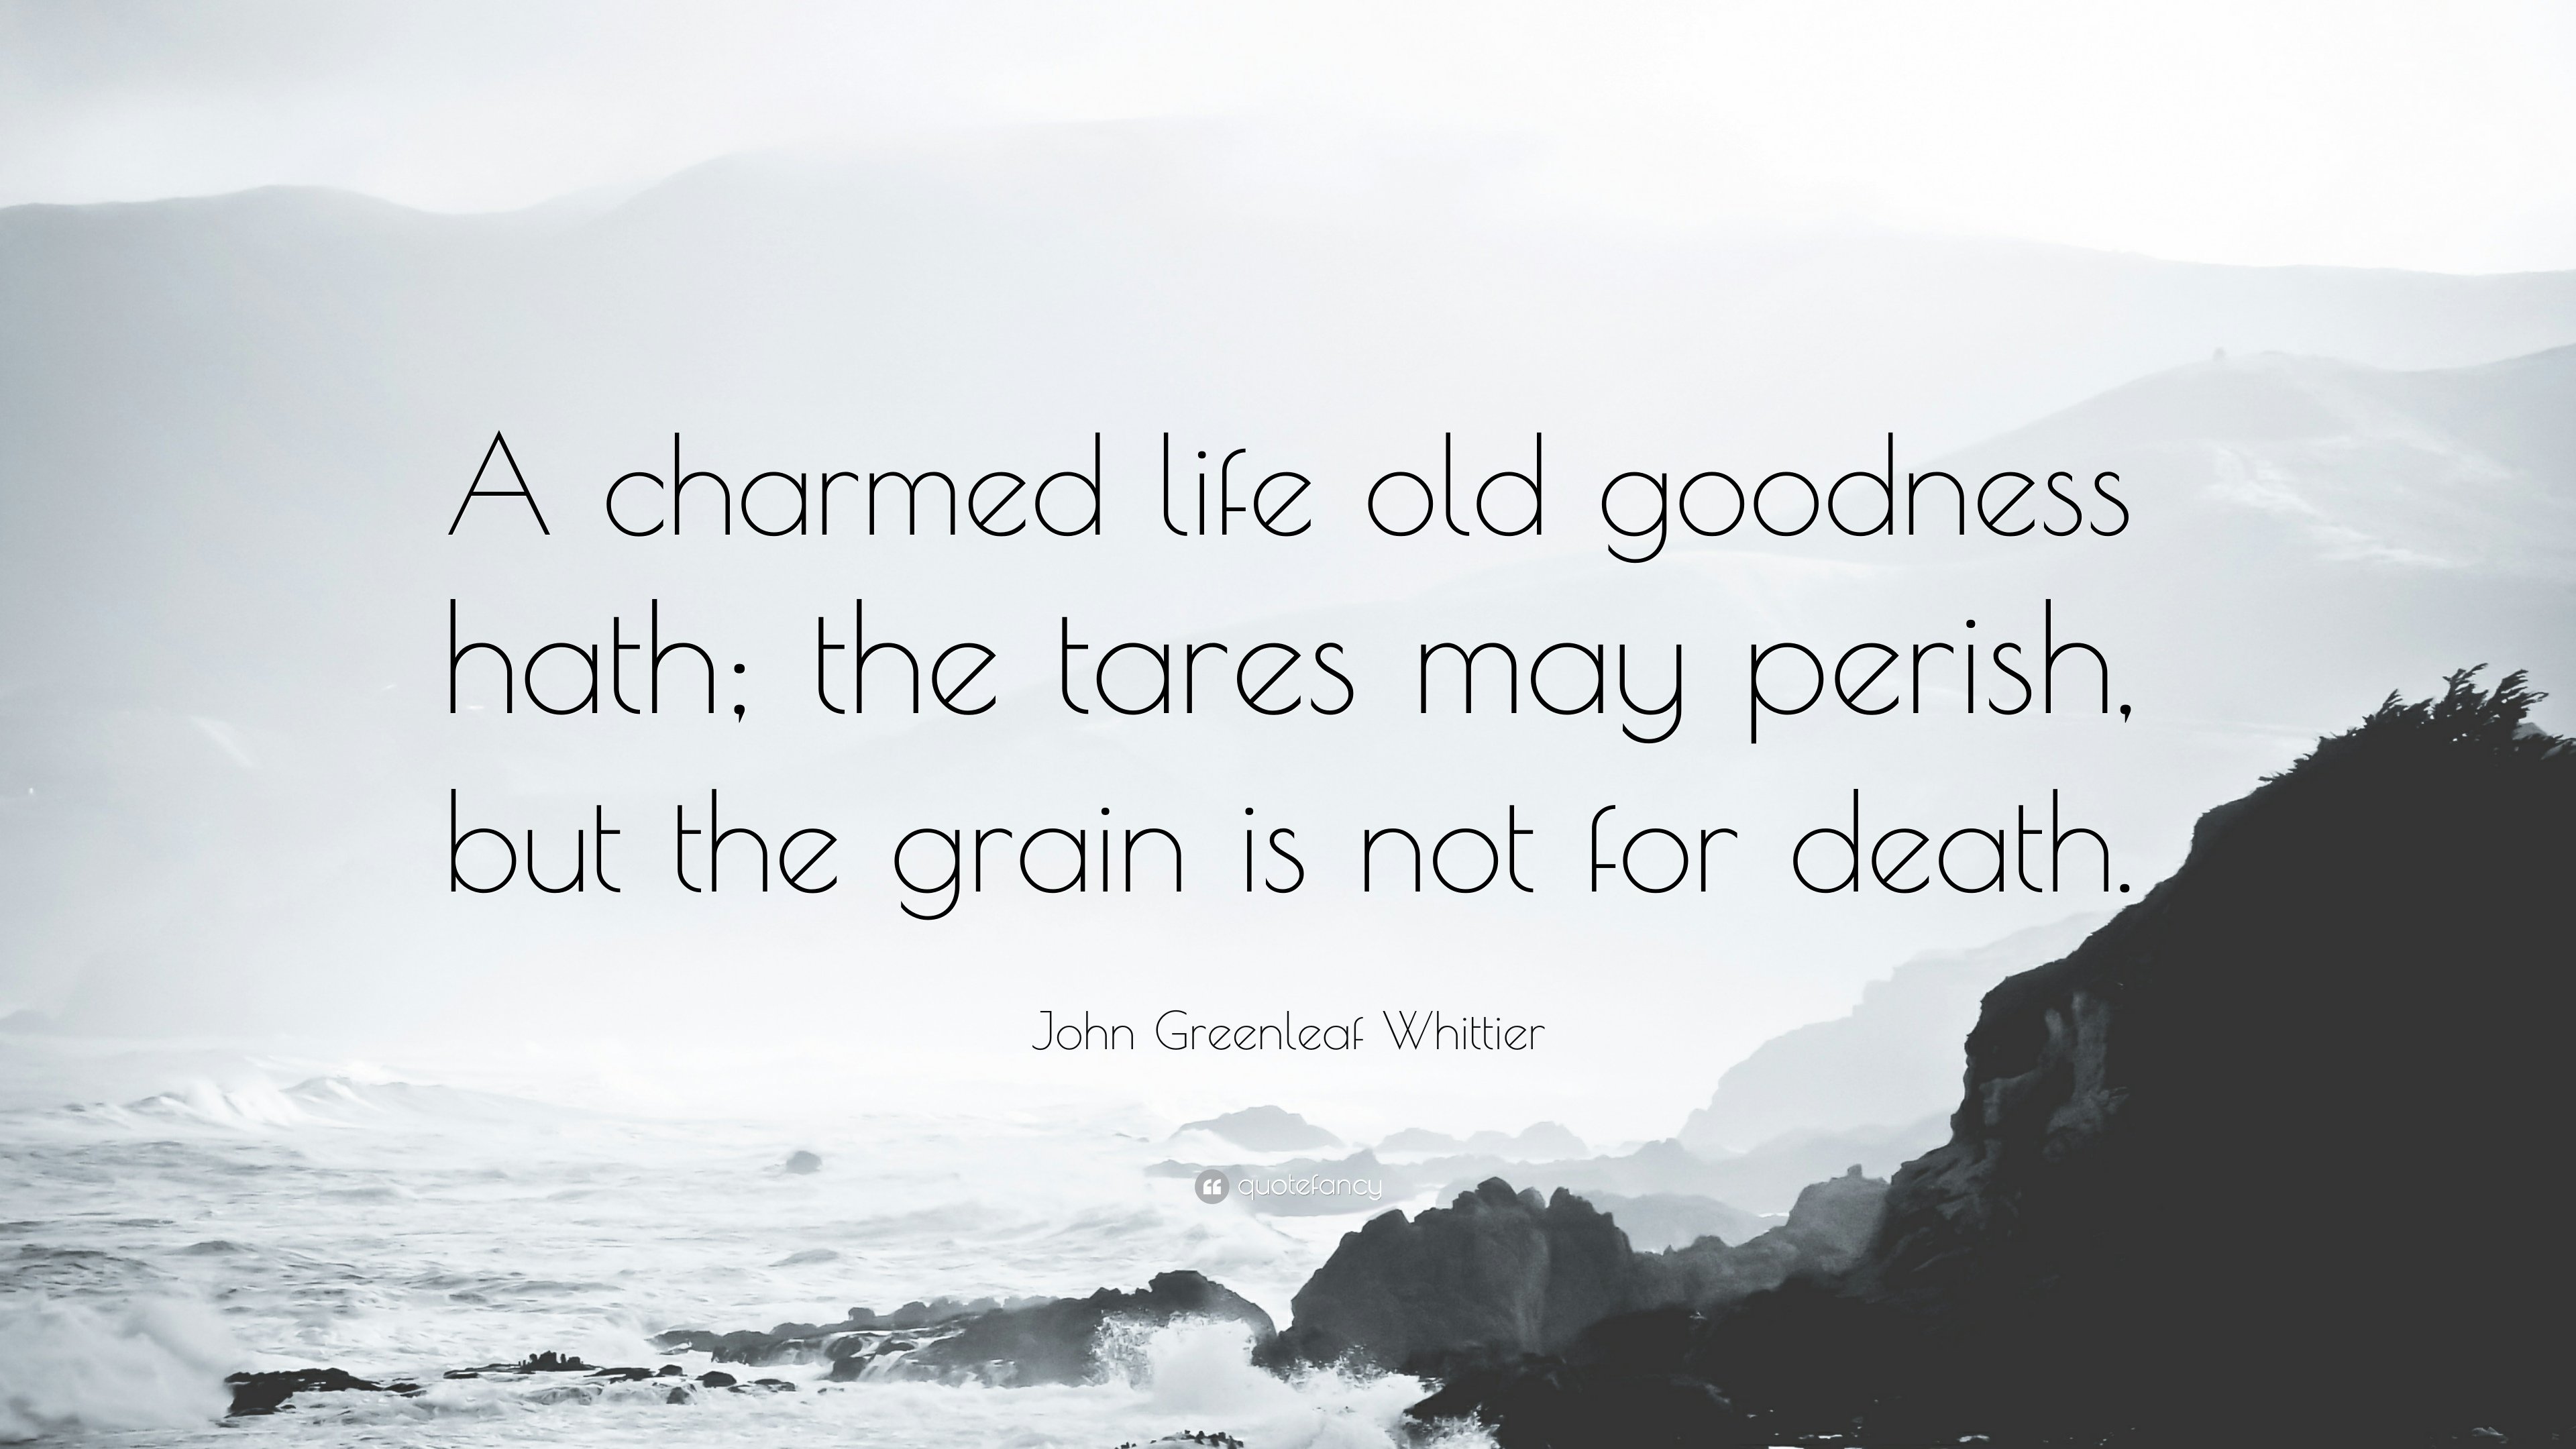 John Greenleaf Whittier Quote: “A charmed life old goodness hath